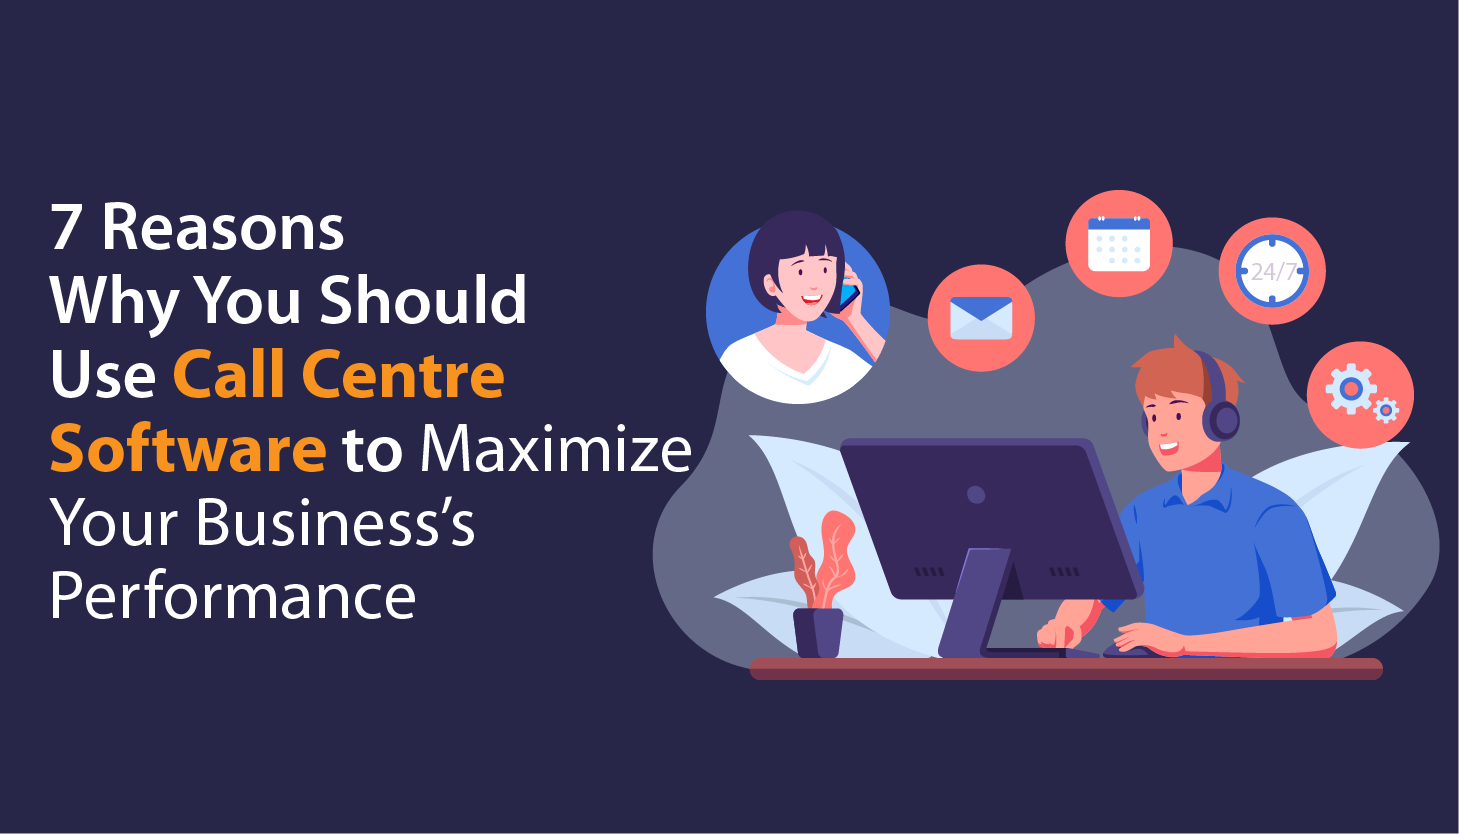  7 Reasons Why You Should Use Call Centre Software to Maximize Your Business’s Performance